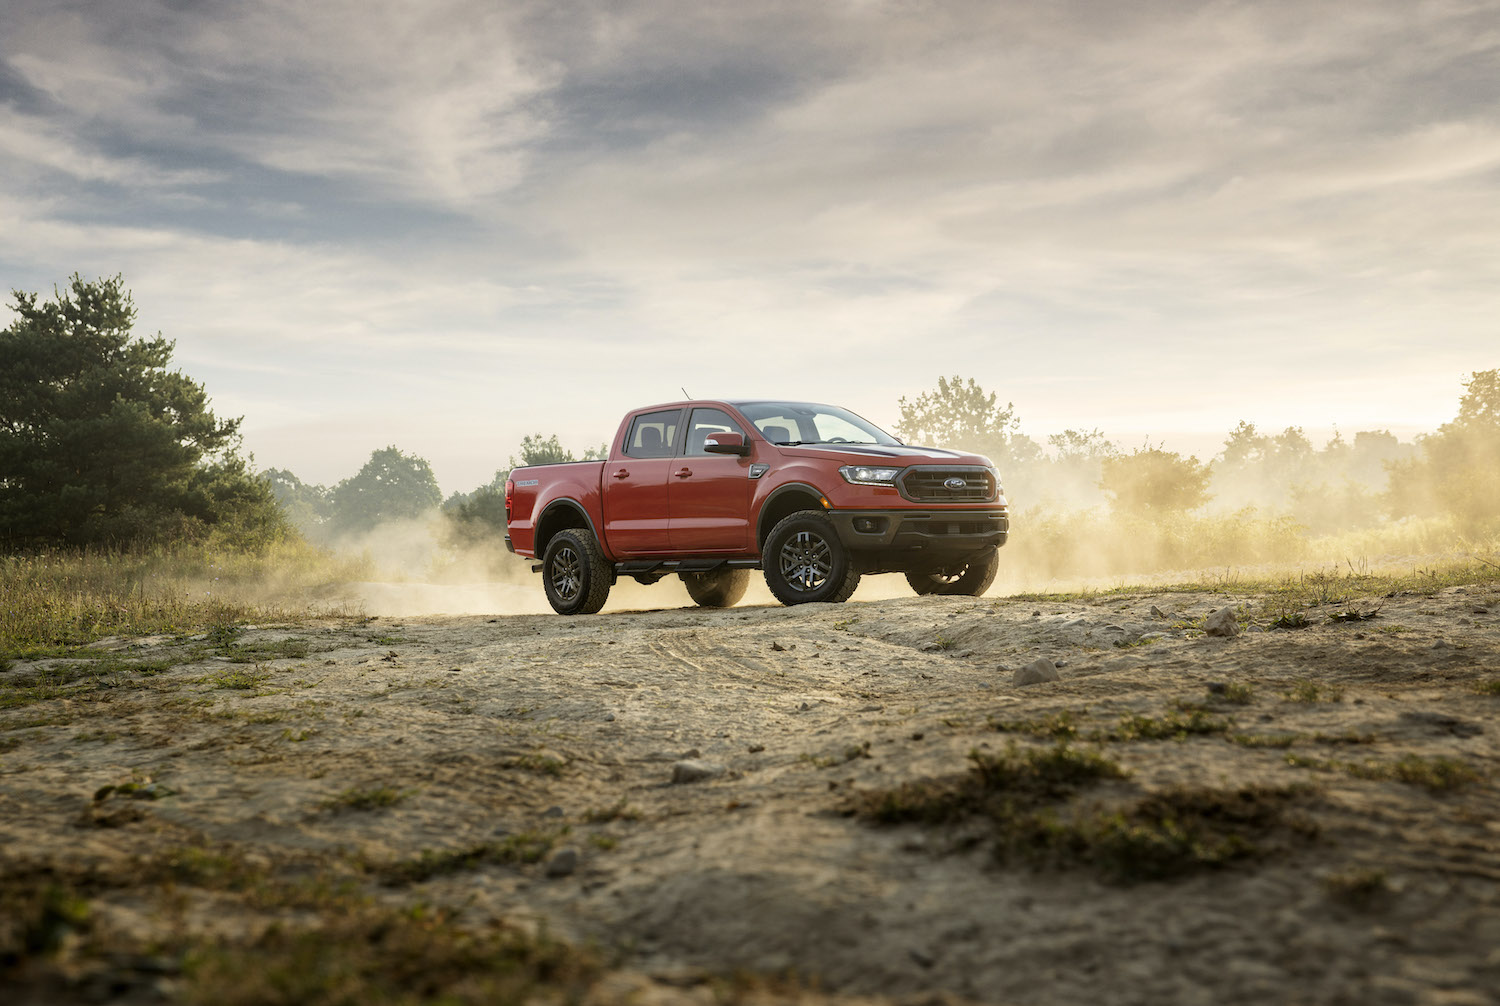 The 2021 Ford Ranger on the trails